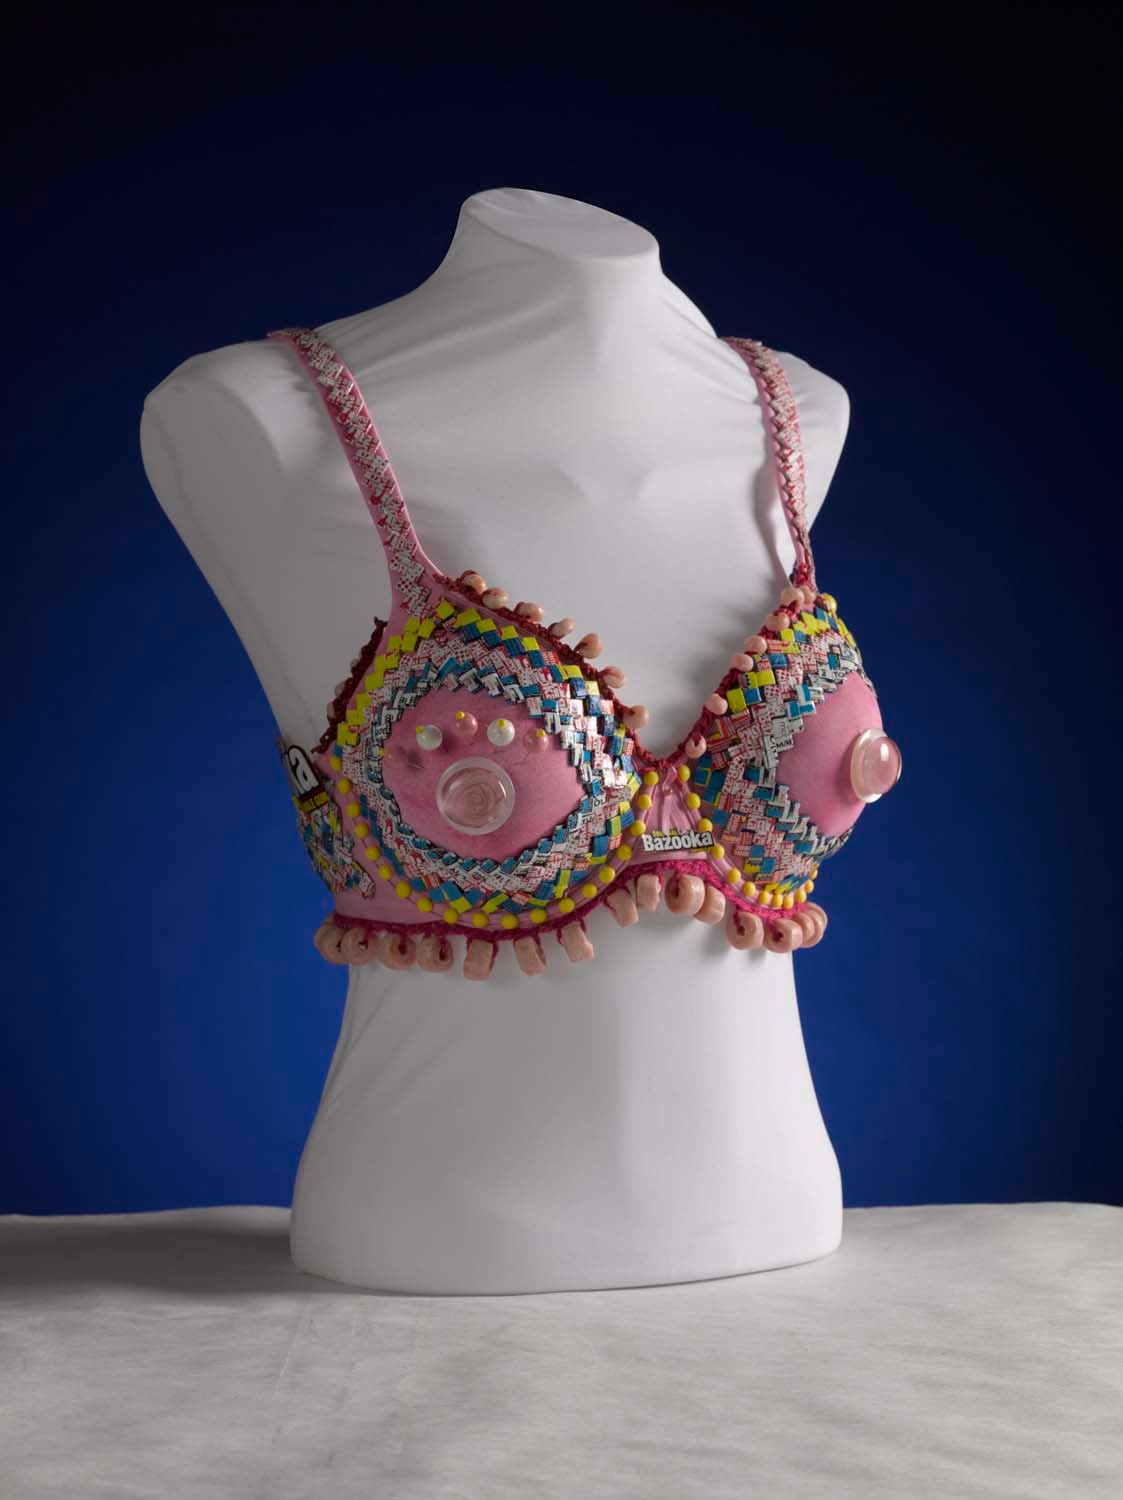 Bra fitters have their breasts turned into sculptures in art celebration of  'boobs' - Yahoo Sport